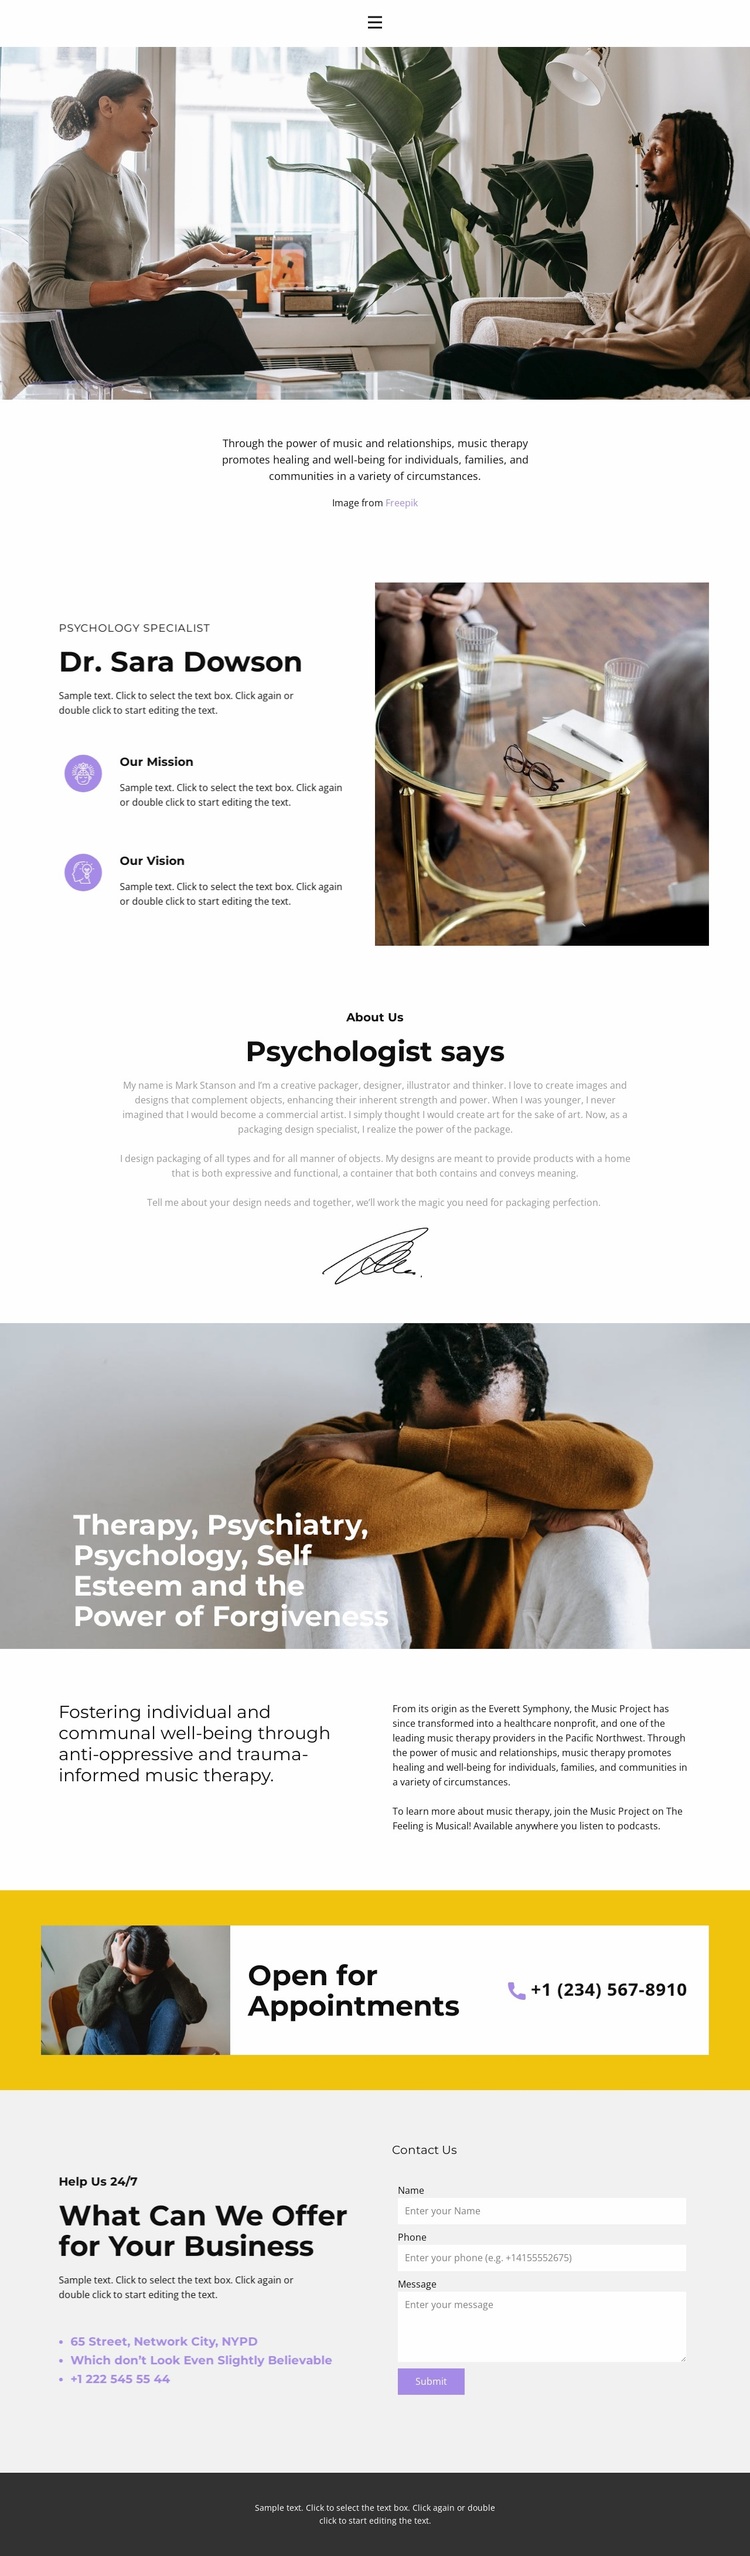 Qualified help from a psychologist Website Design